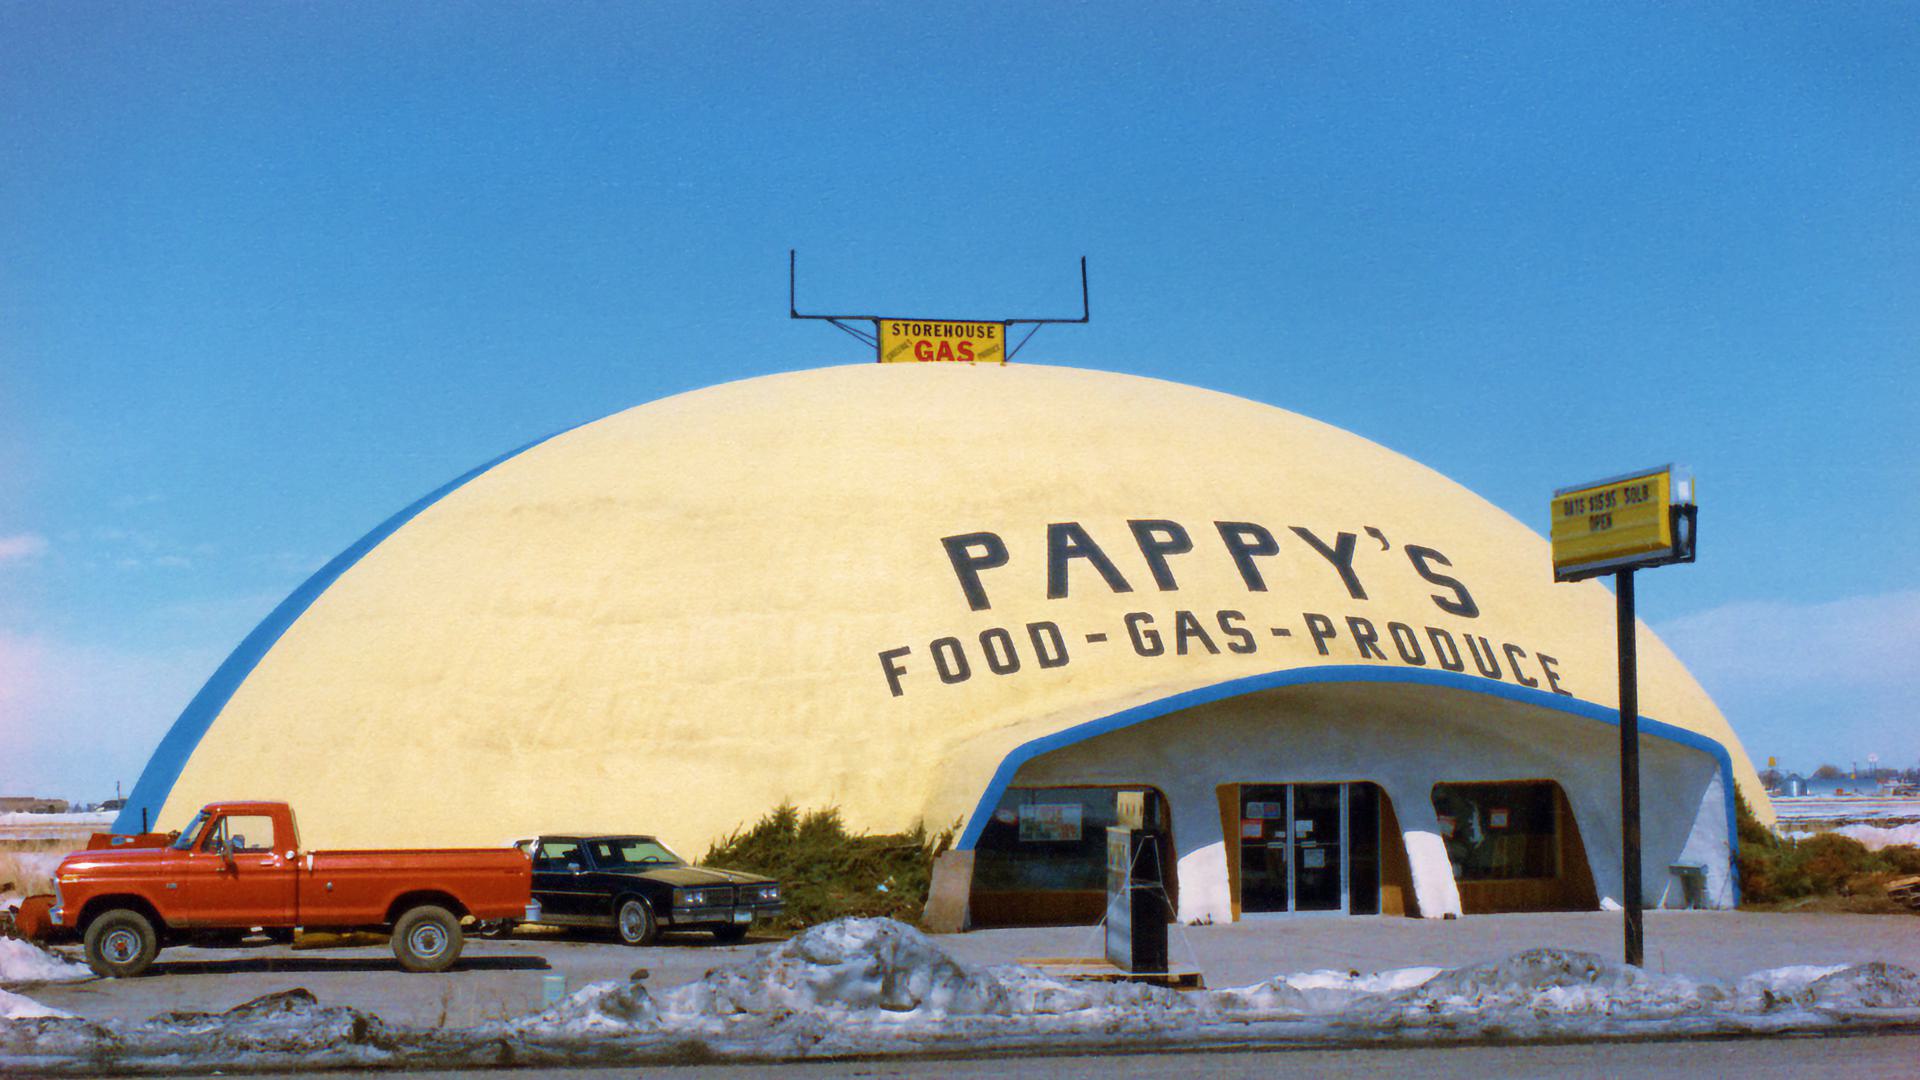 The yellow and blue color scheme of Pappy's Storehouse.